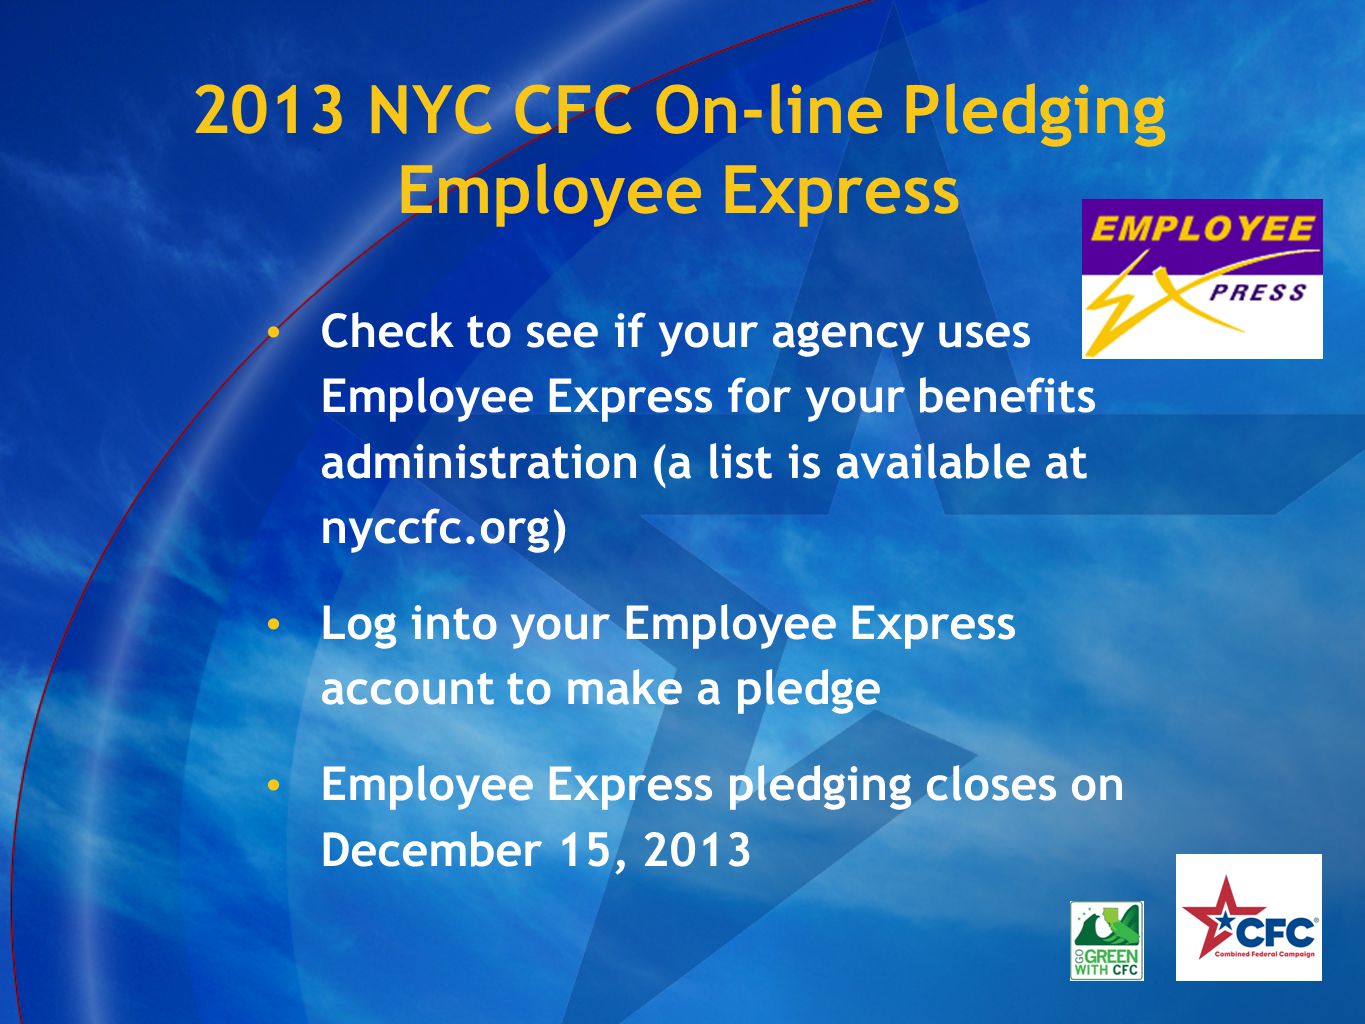 2013 NYC CFC On-line Pledging Employee Express Check to see if your agency uses Employee Express for your benefits administration (a list is available at nyccfc.org) Log into your Employee Express account to make a pledge Employee Express pledging closes on December 15, 2013